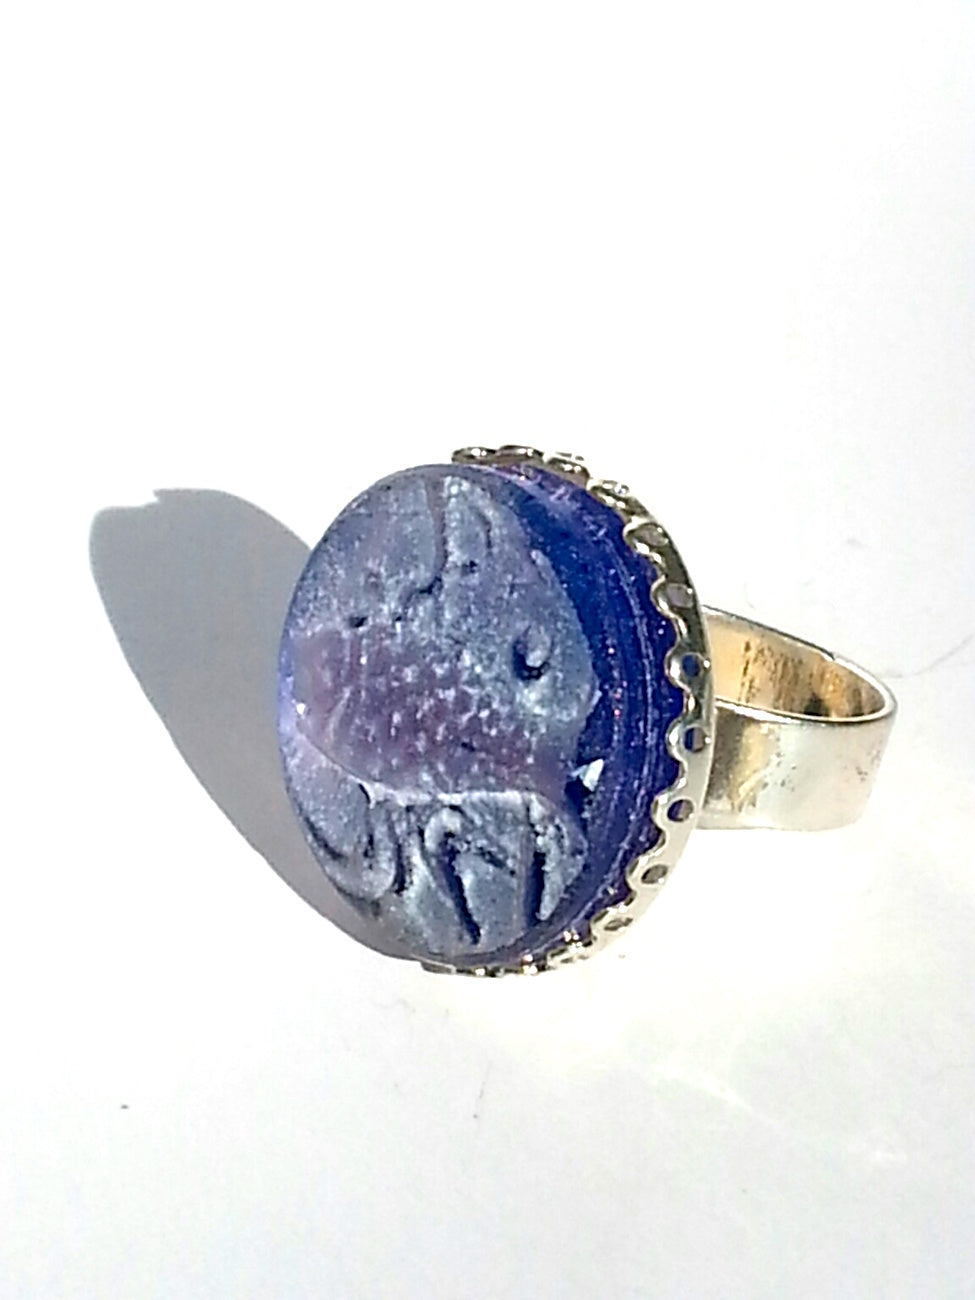 Ring Hand Cast French Glass Fish Blue Silver Plated Band